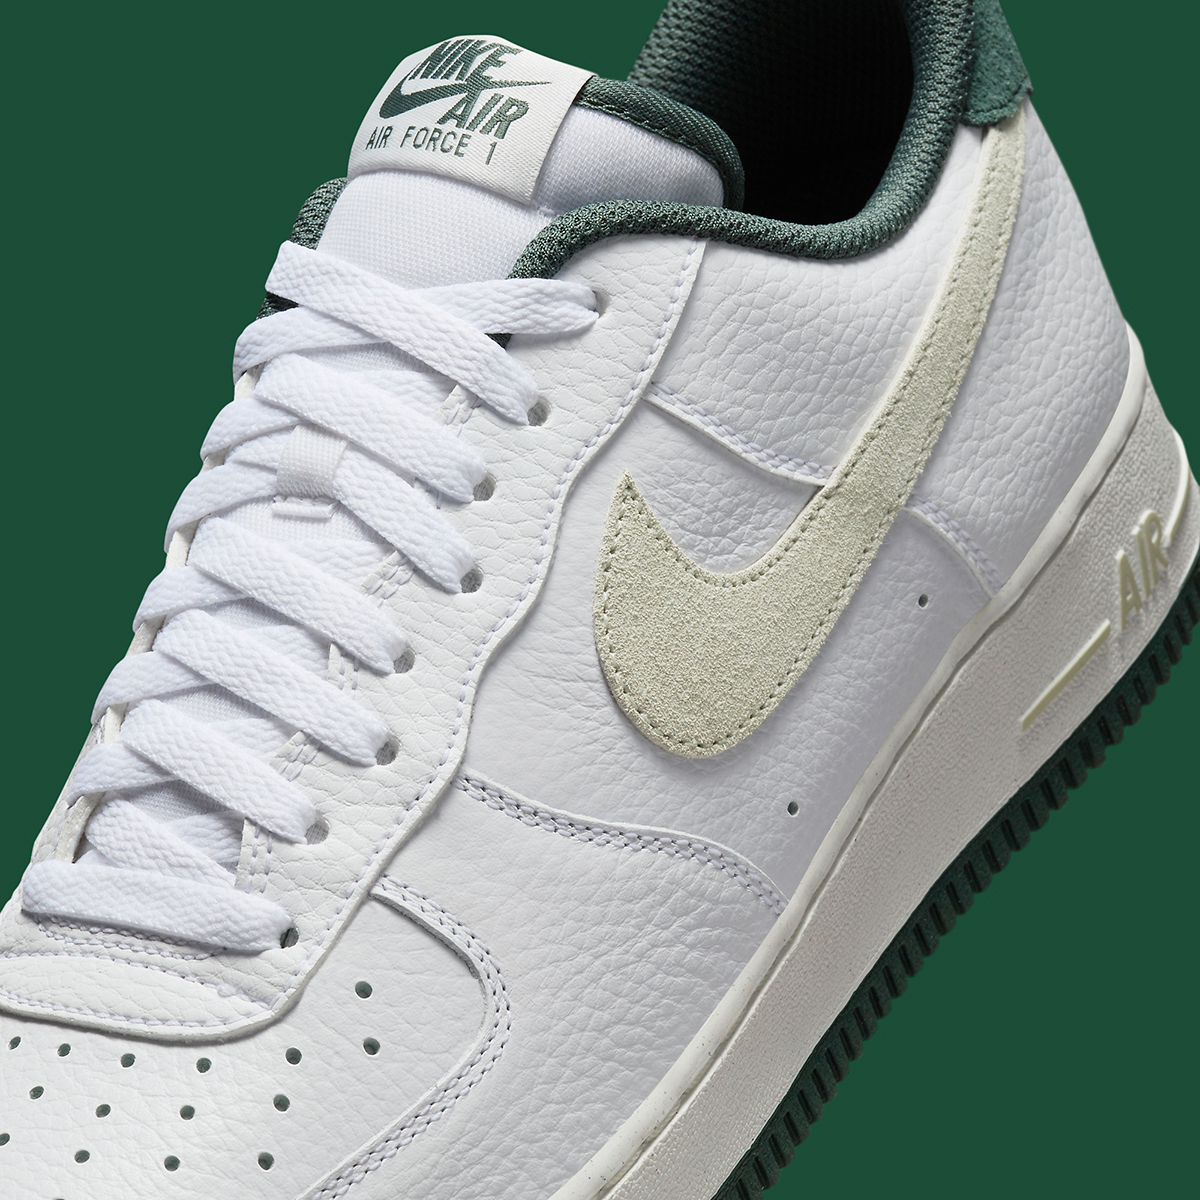 Nike Air Force 1 Low White Sea Glass Vintage Green Hf1939 100 3